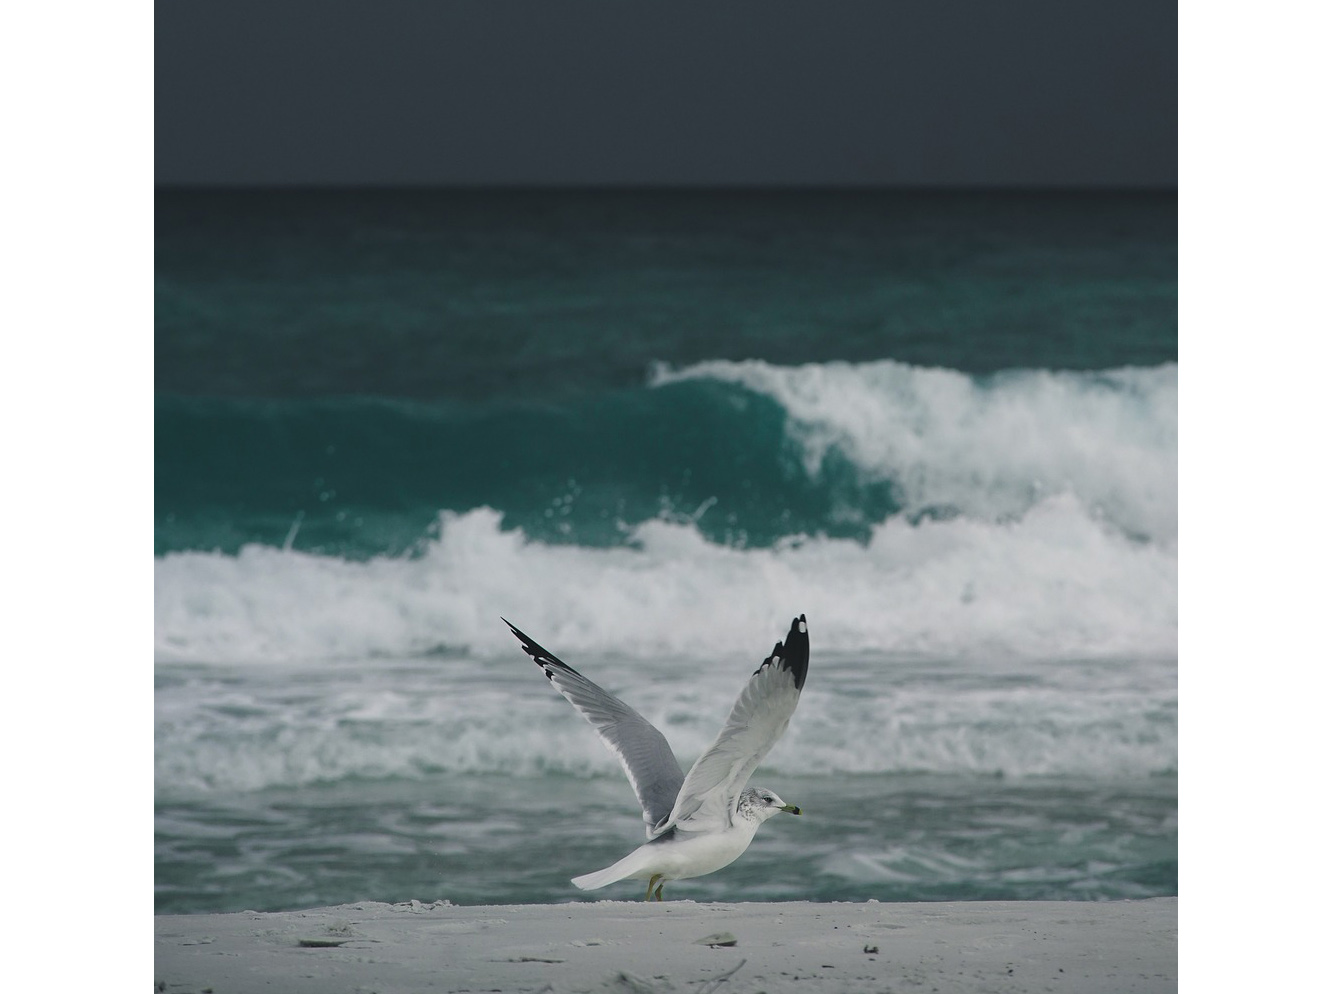 Ring-billed Gull on a beach with a stormy sea in the background.